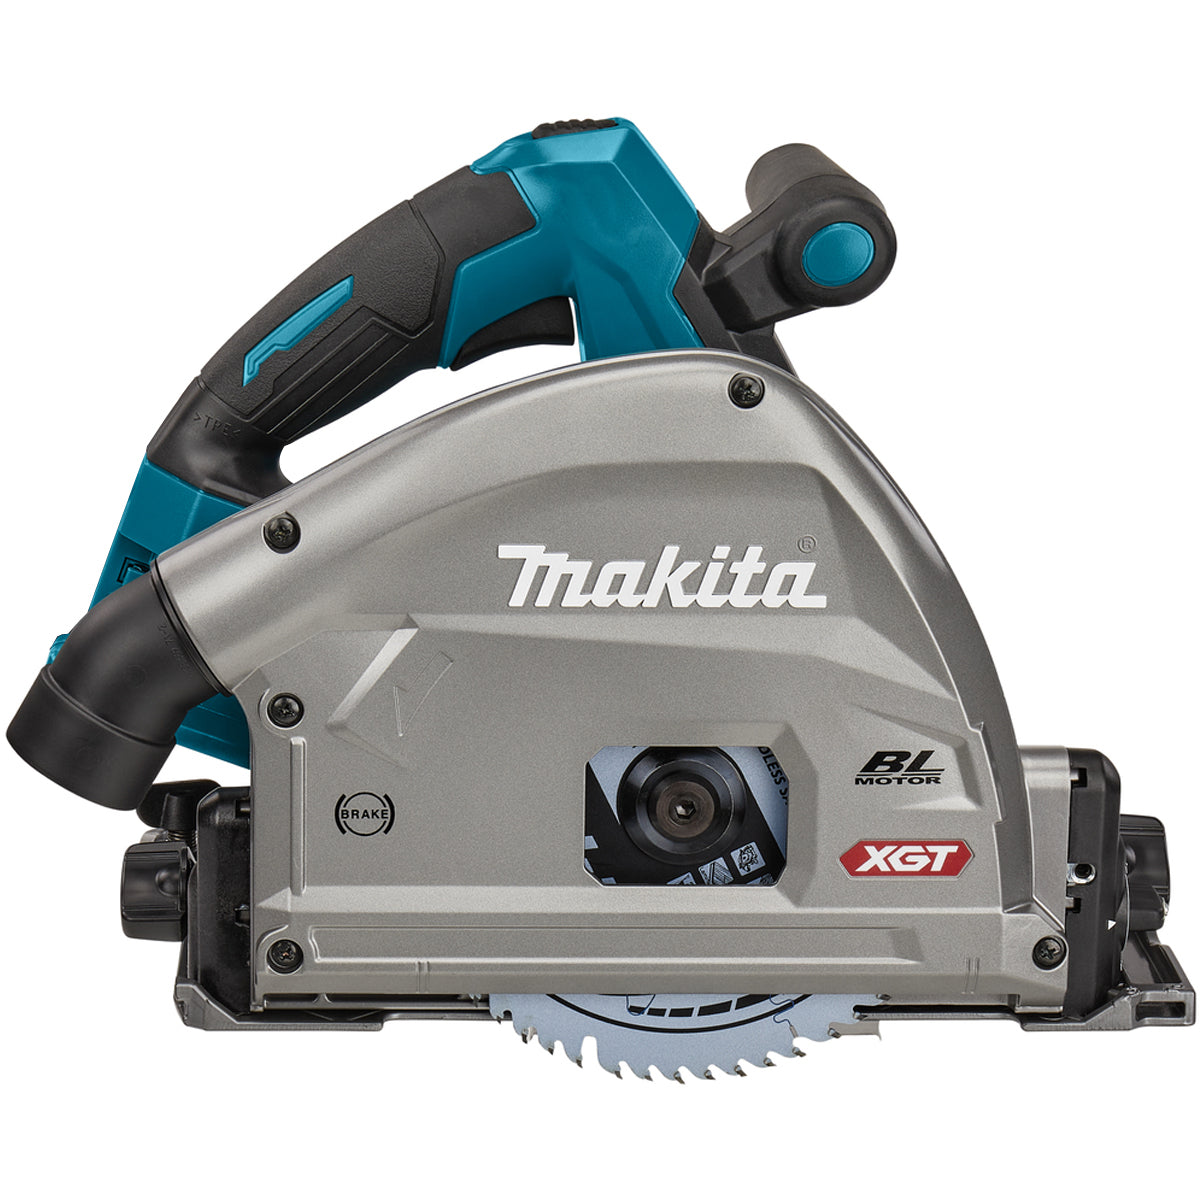 Makita SP001GZ03 40Vmax XGT 165mm Brushless Plunge Saw With Type 4 Case